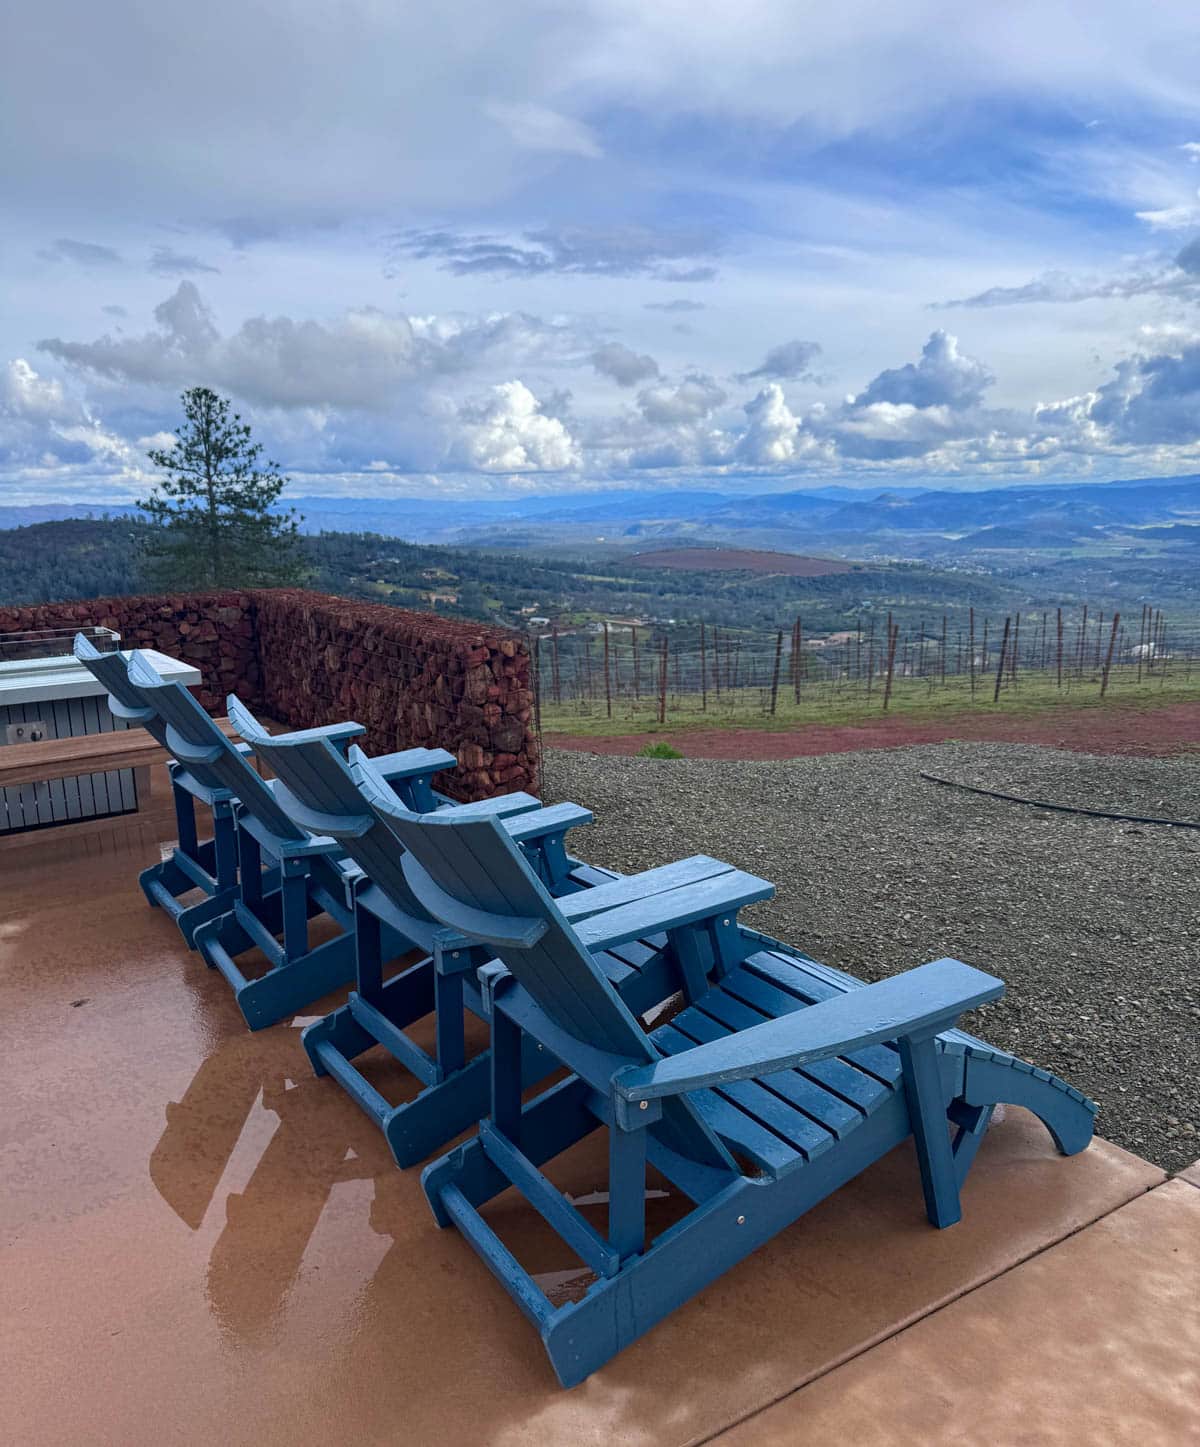 Blue Adirondack chairs on patio with view of vineyard and mountains.